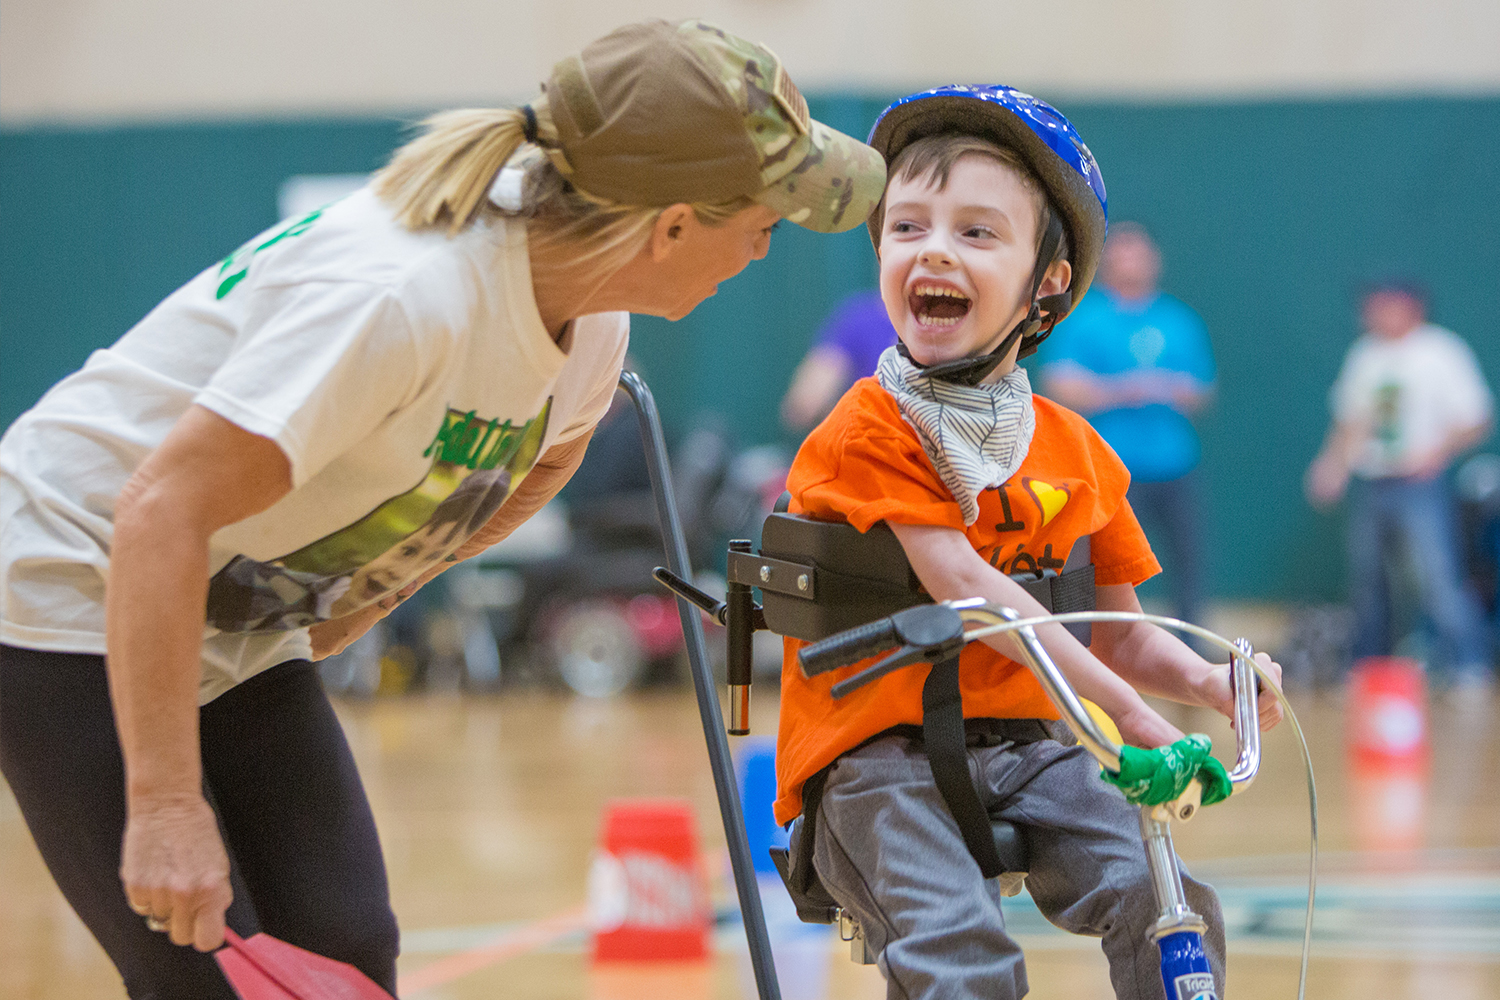 A boy smiles as he tries an adapted bike at the expo.